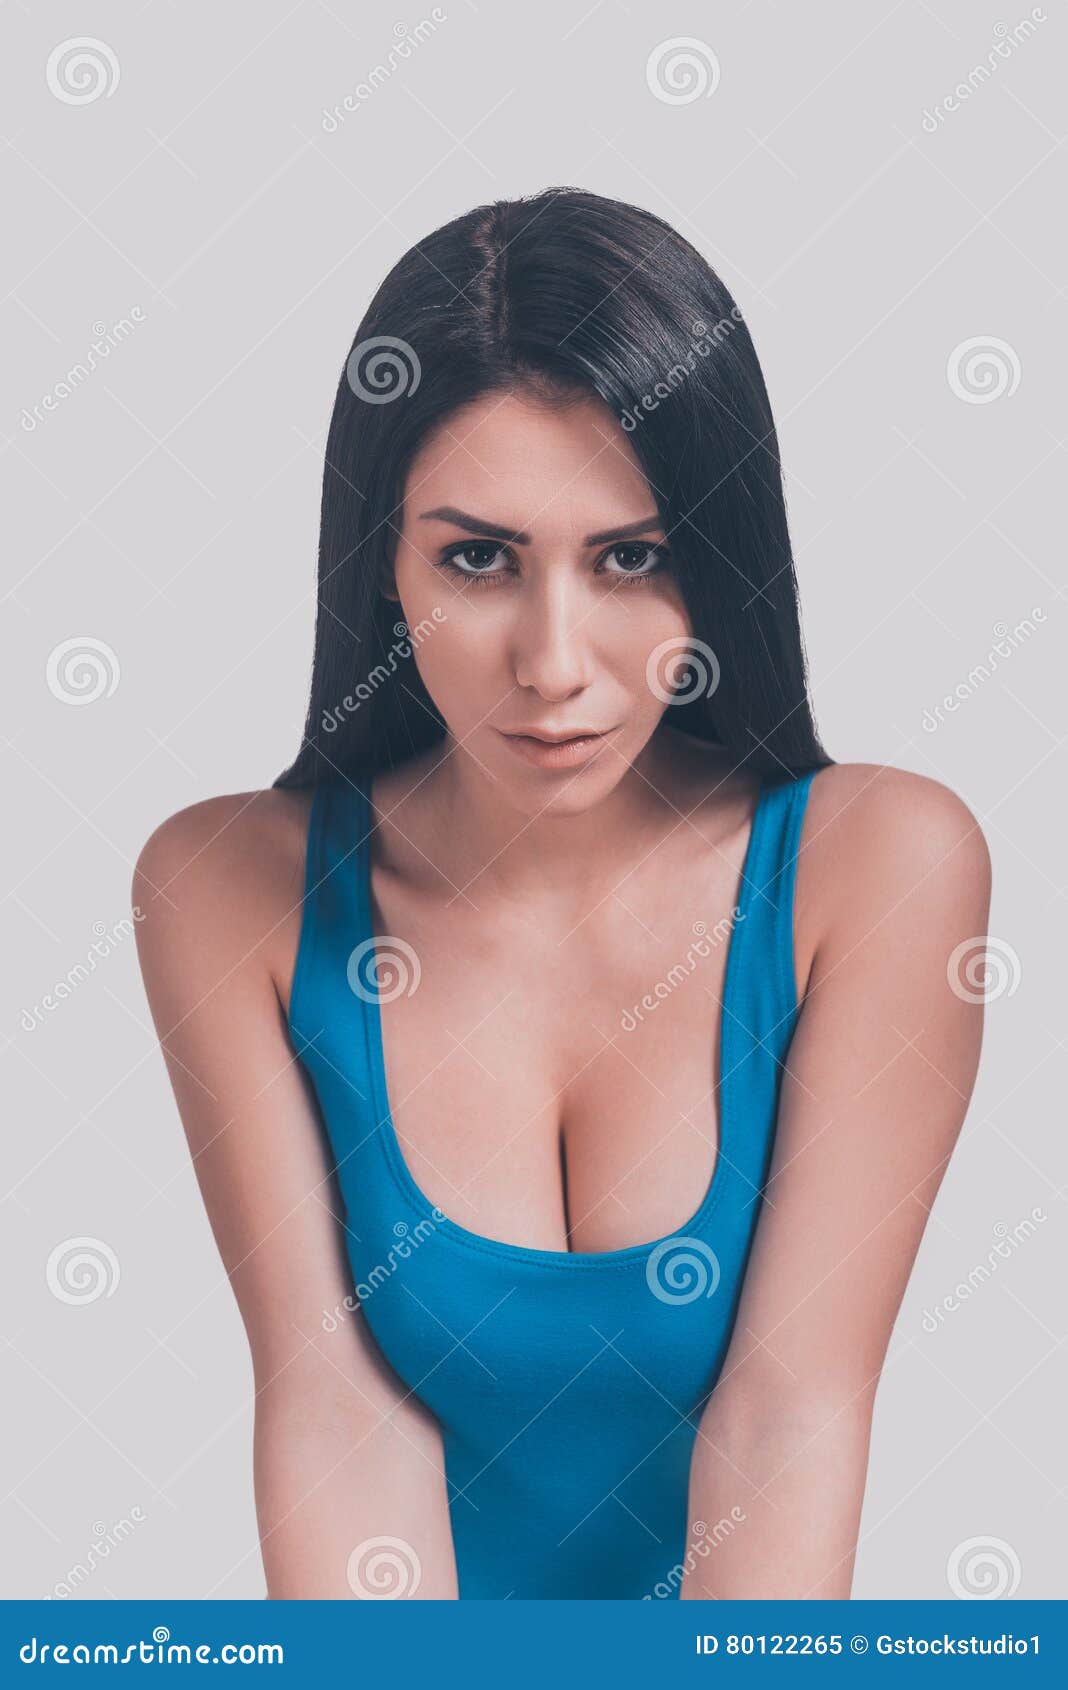 3,307 Woman Cleavage Dress Stock Photos - Free & Royalty-Free Stock Photos  from Dreamstime